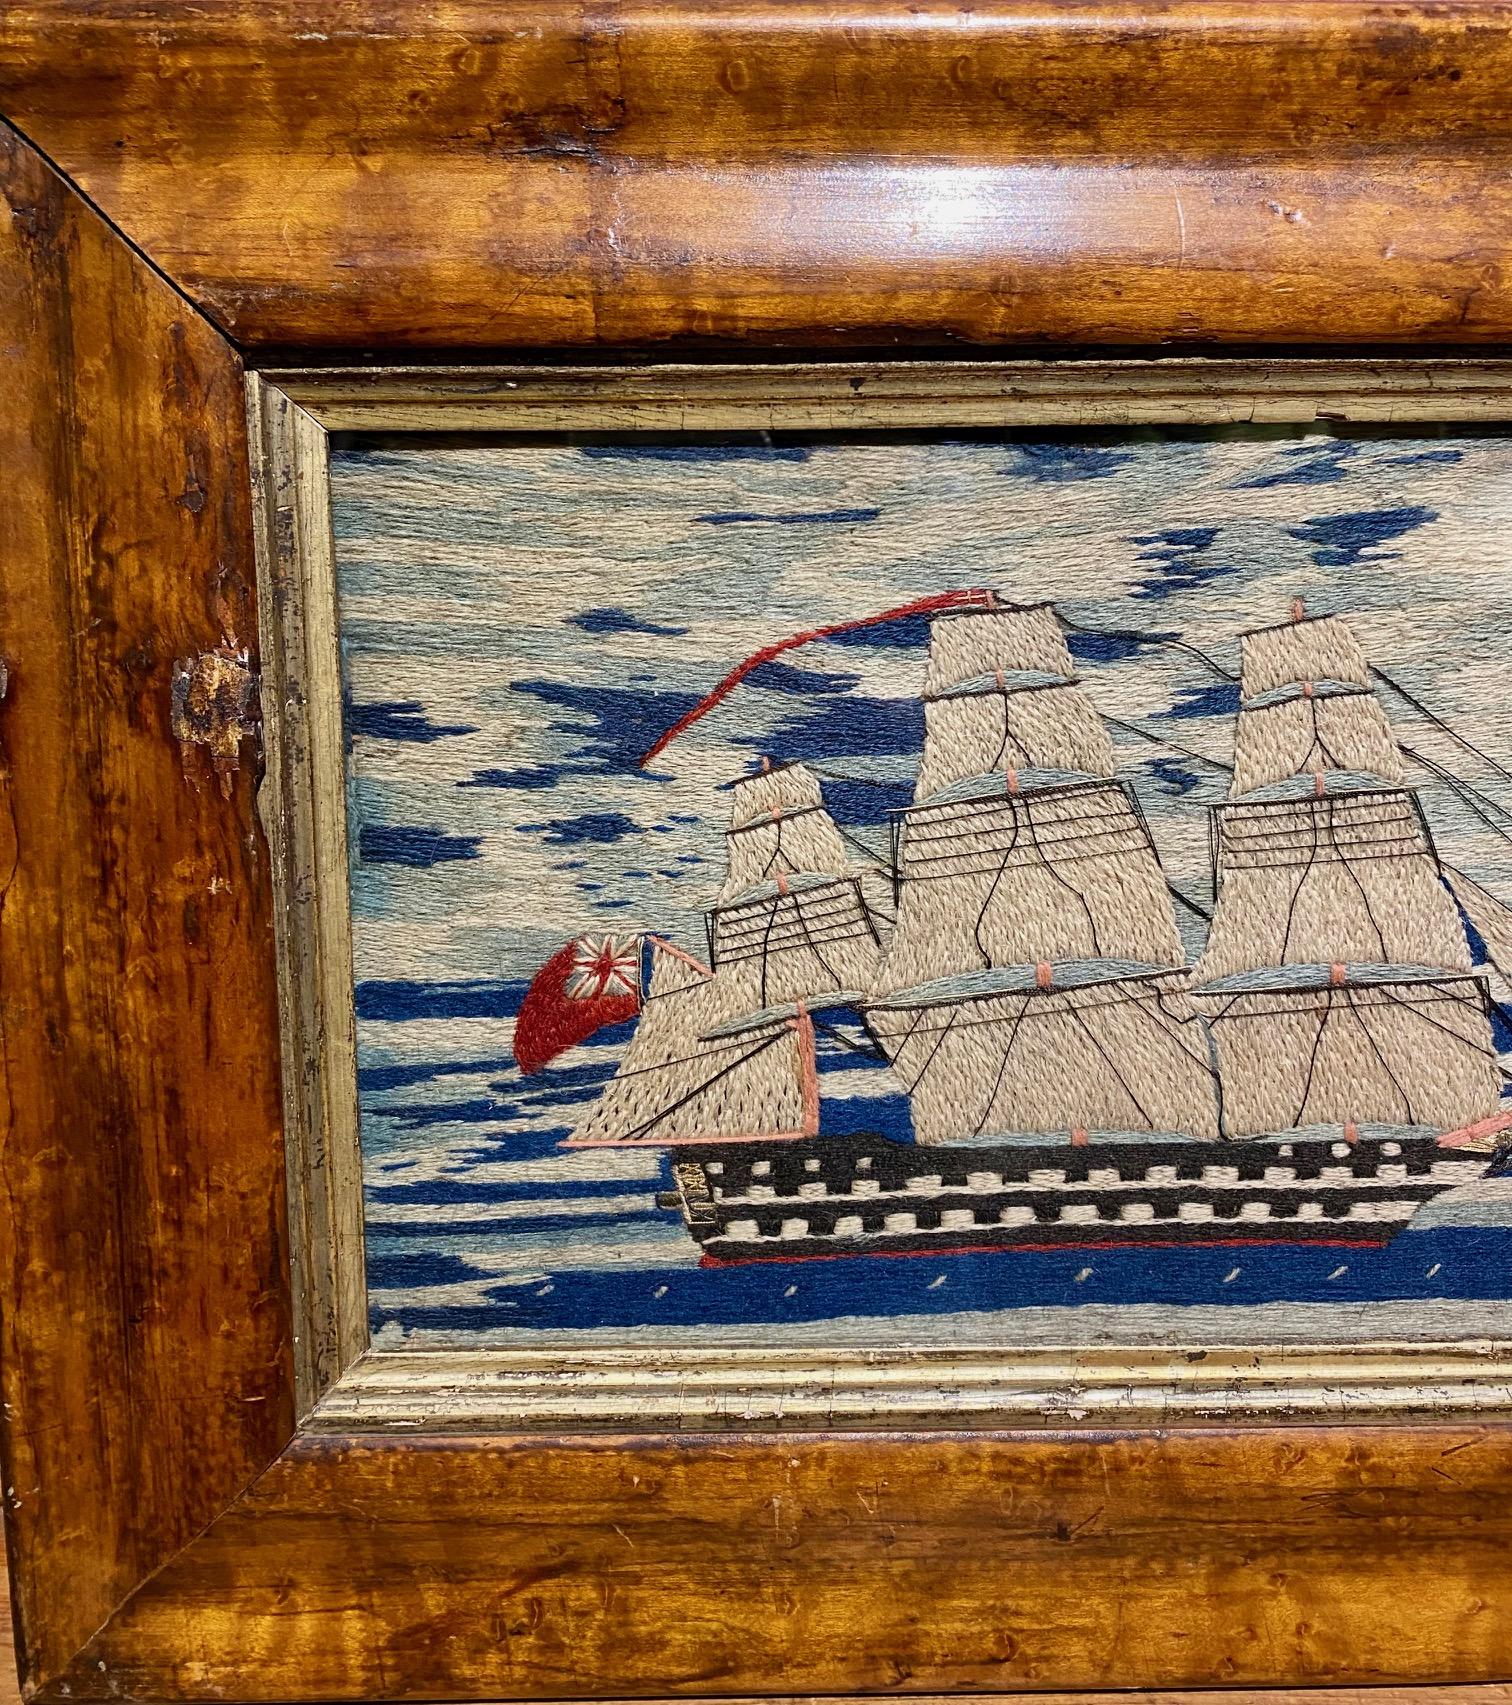 19th Century Sailor's Woolie with Double Decker Ship of the Line, circa 1860, a hand crafted sailor's woolwork picture with starboard side view of a double decker Ship of the Line  under full sail, flying the red ensign, under a brilliant, vivid